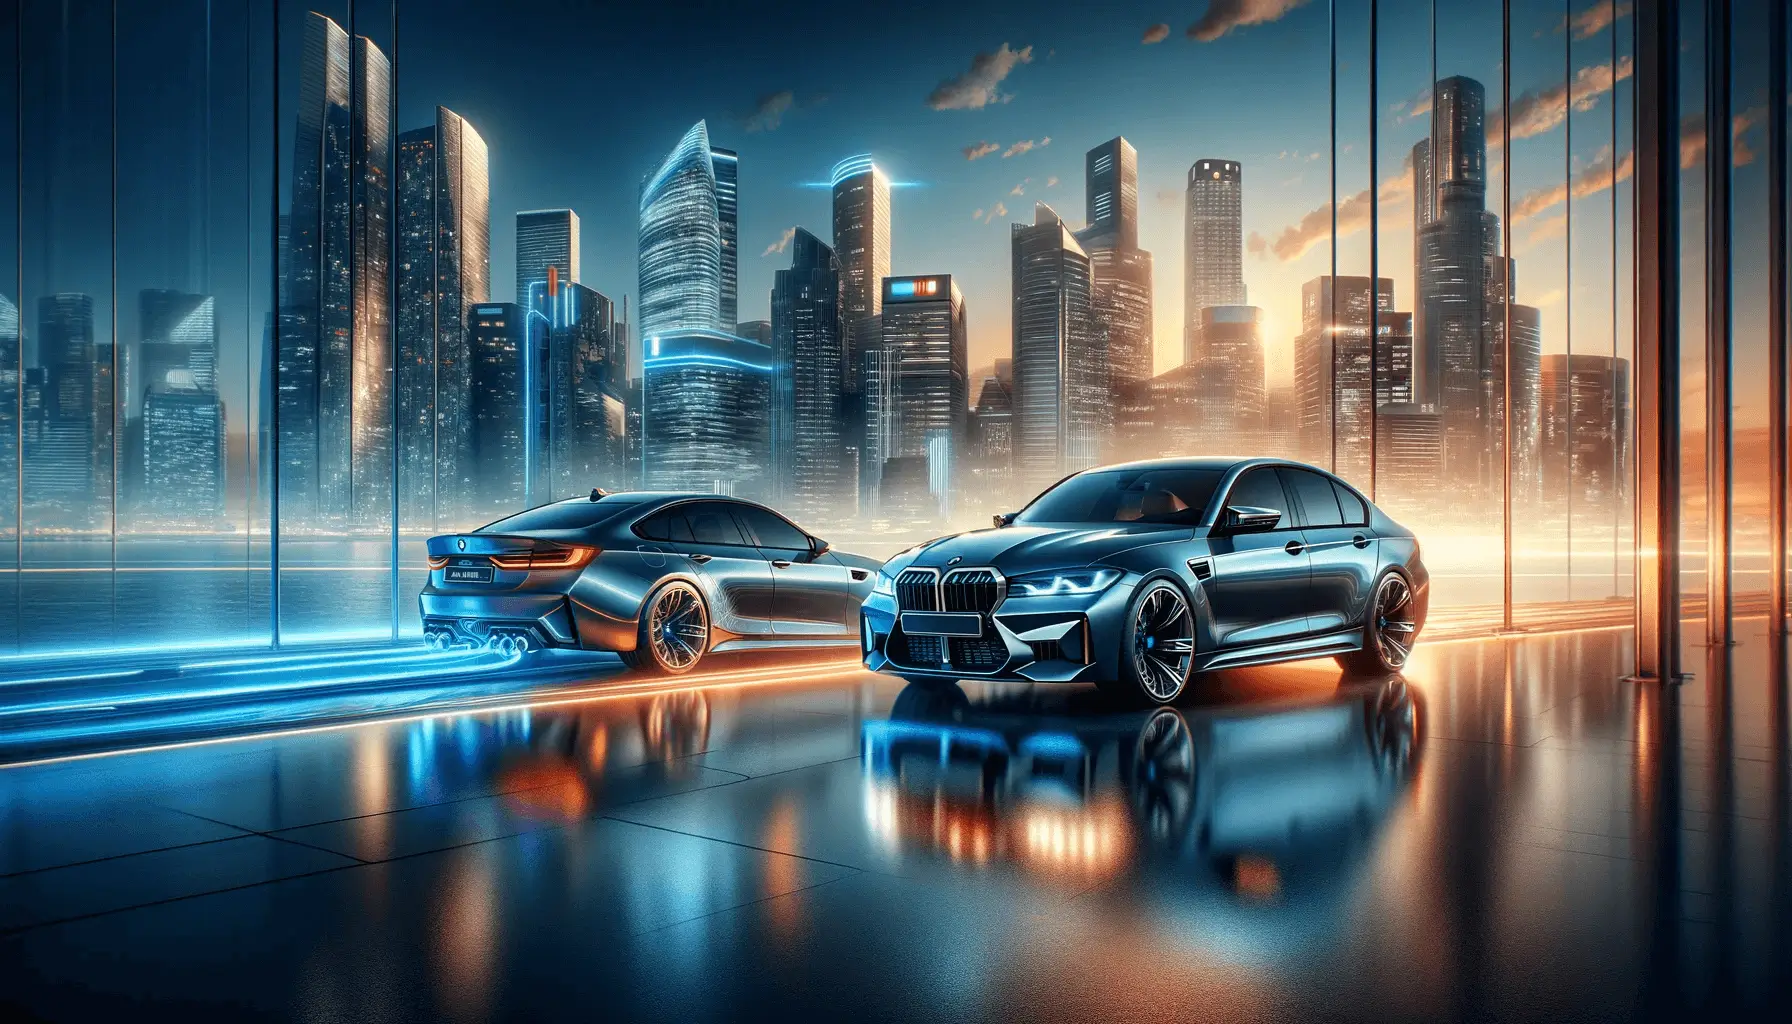 Futuristic cityscape at dusk with modern BMW M3 models, showcasing the evolution from gasoline to electric power, symbolizing innovation and tradition.